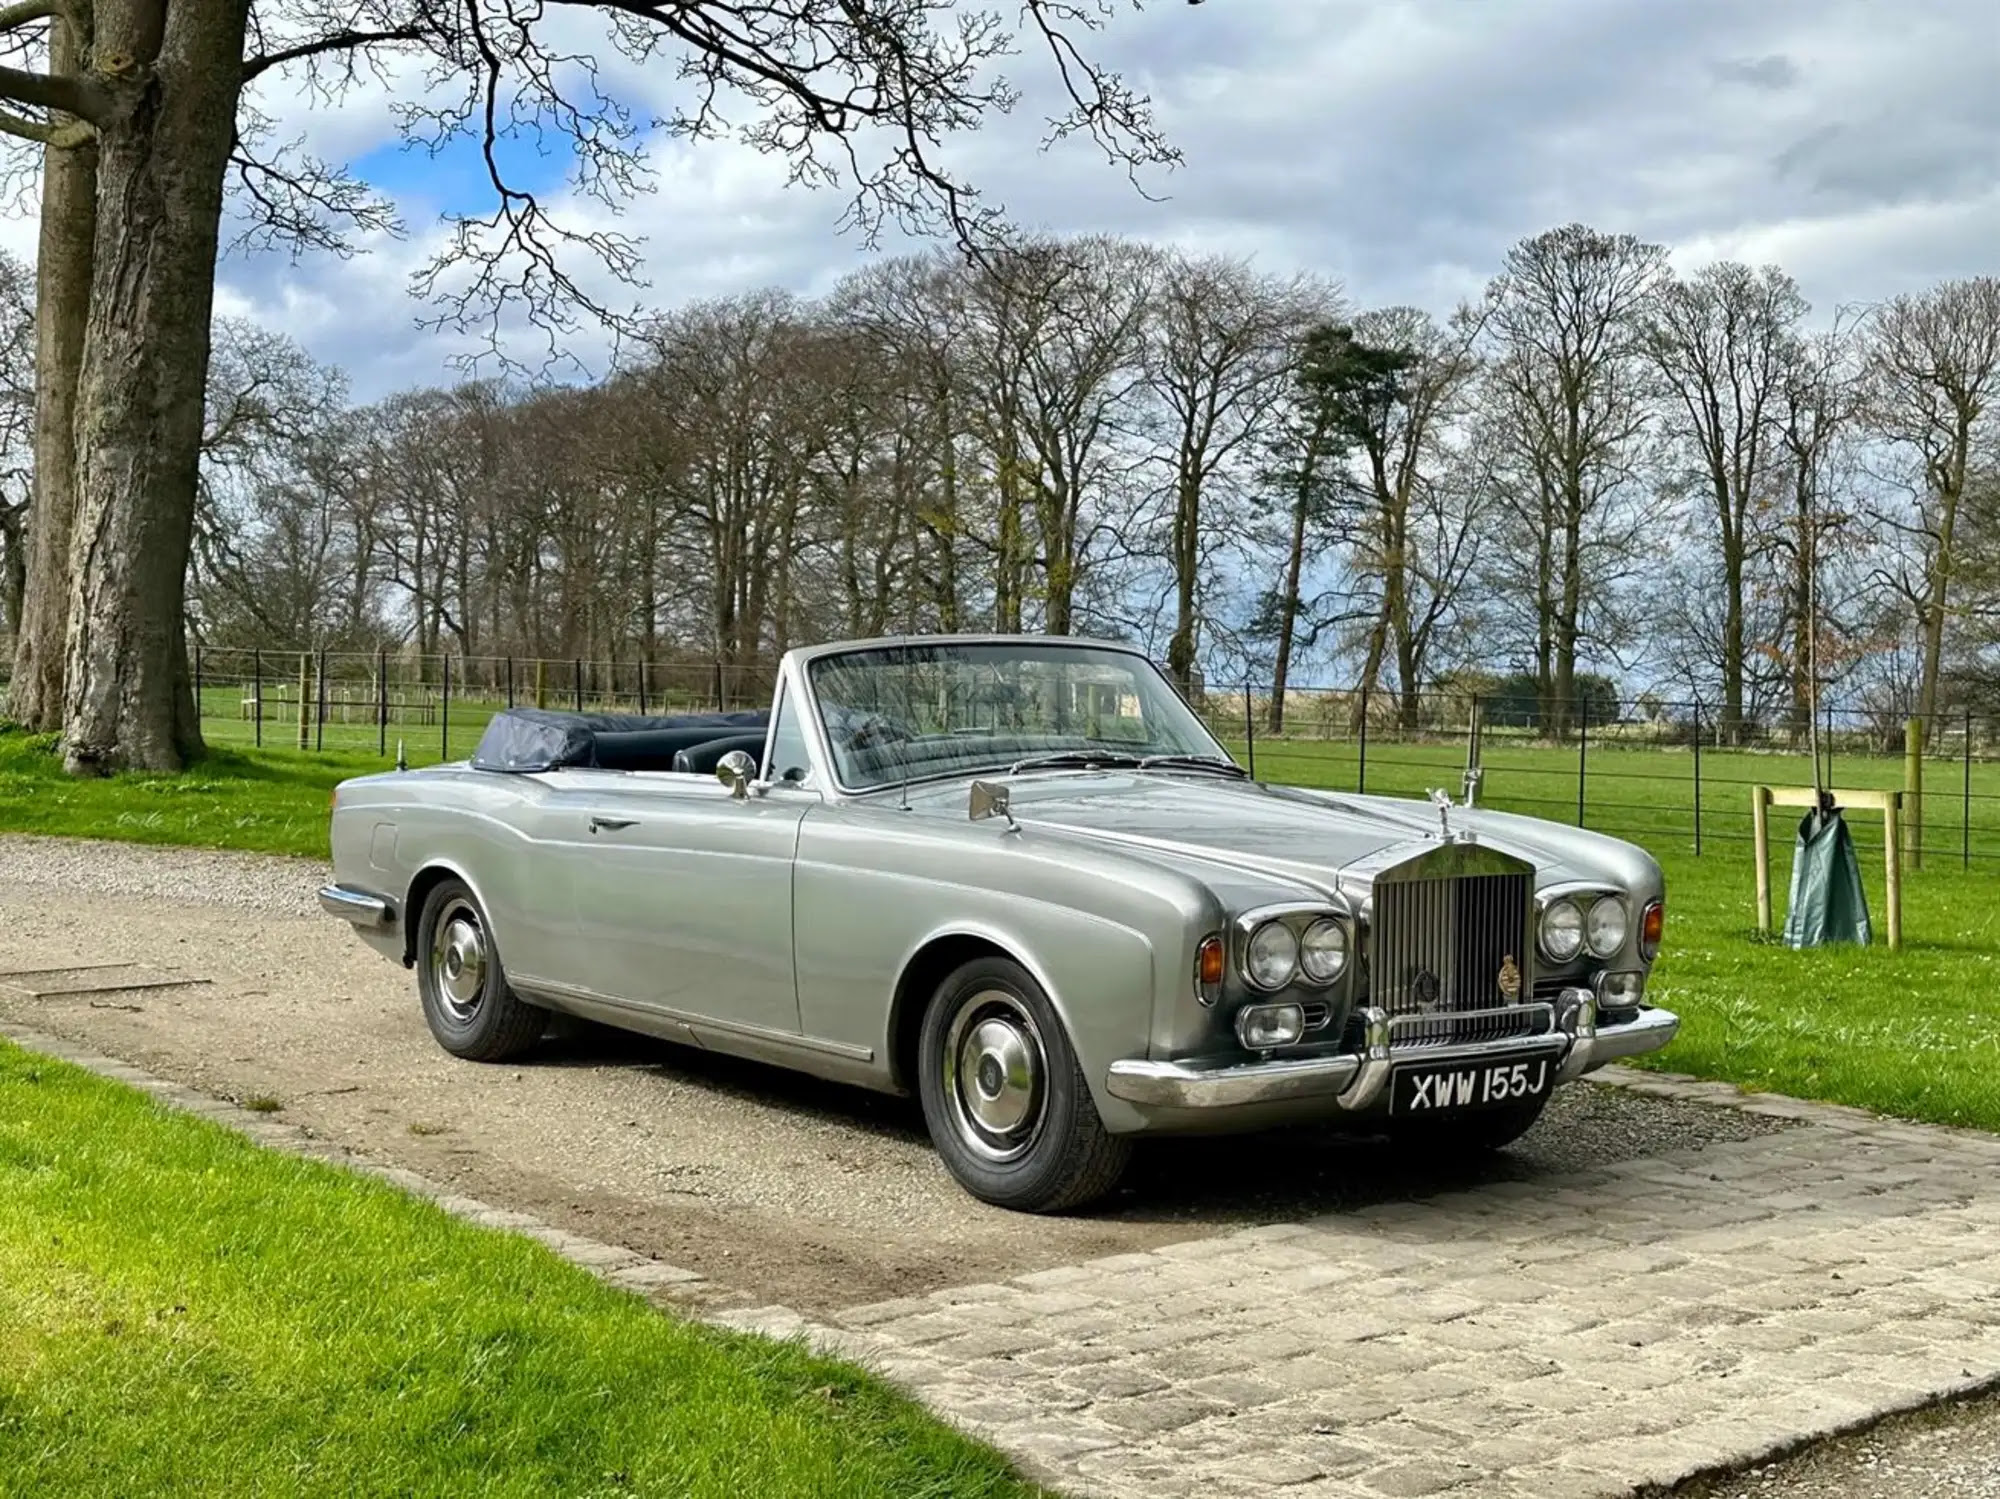 A 1971 Rolls-Royce Corniche Convertible which is expected to fetch between £50,000 – £60,000